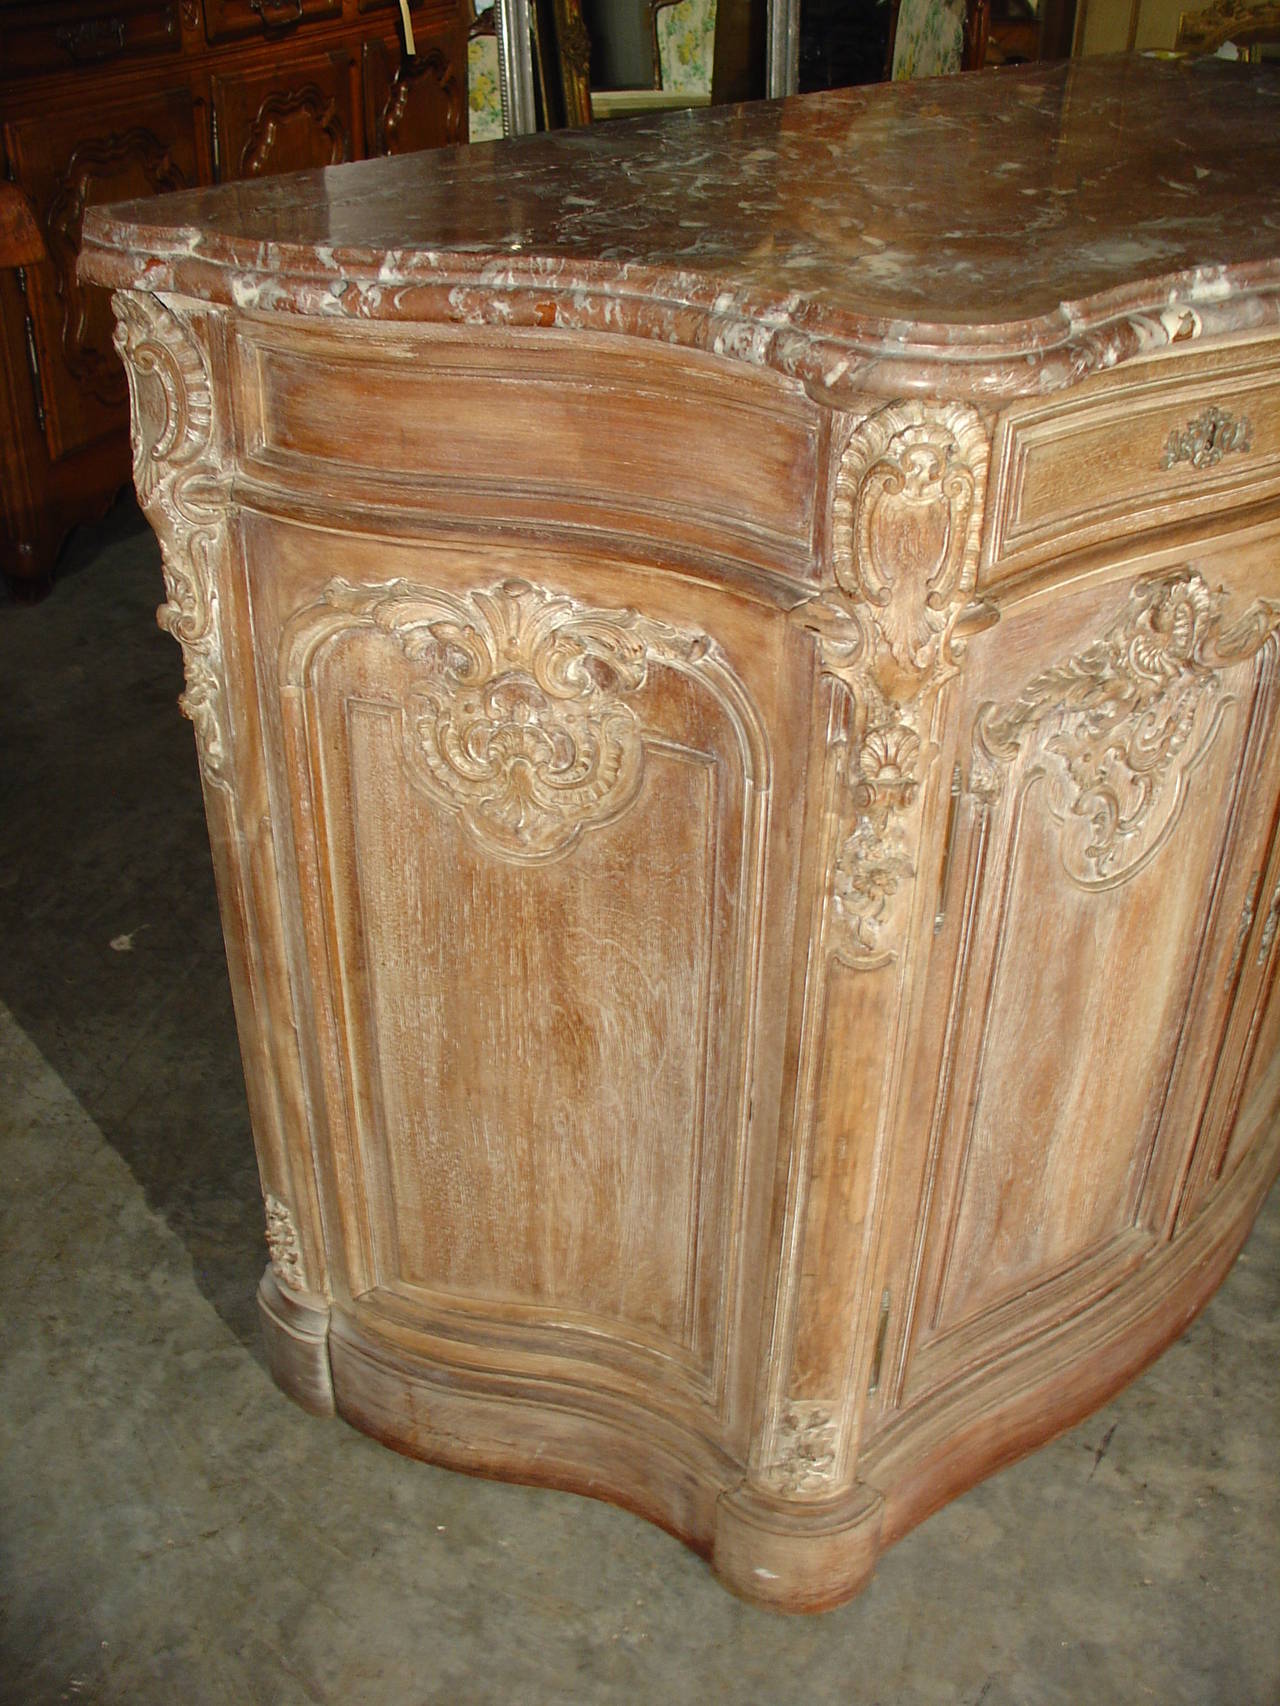 This stunning antique French Buffet de Chasse has  two drawers and a beautifully shaped front and sides, with a shaped original piece of rouge marble on top. There are s-curves on the sides with the backs of the sides extending out further than the